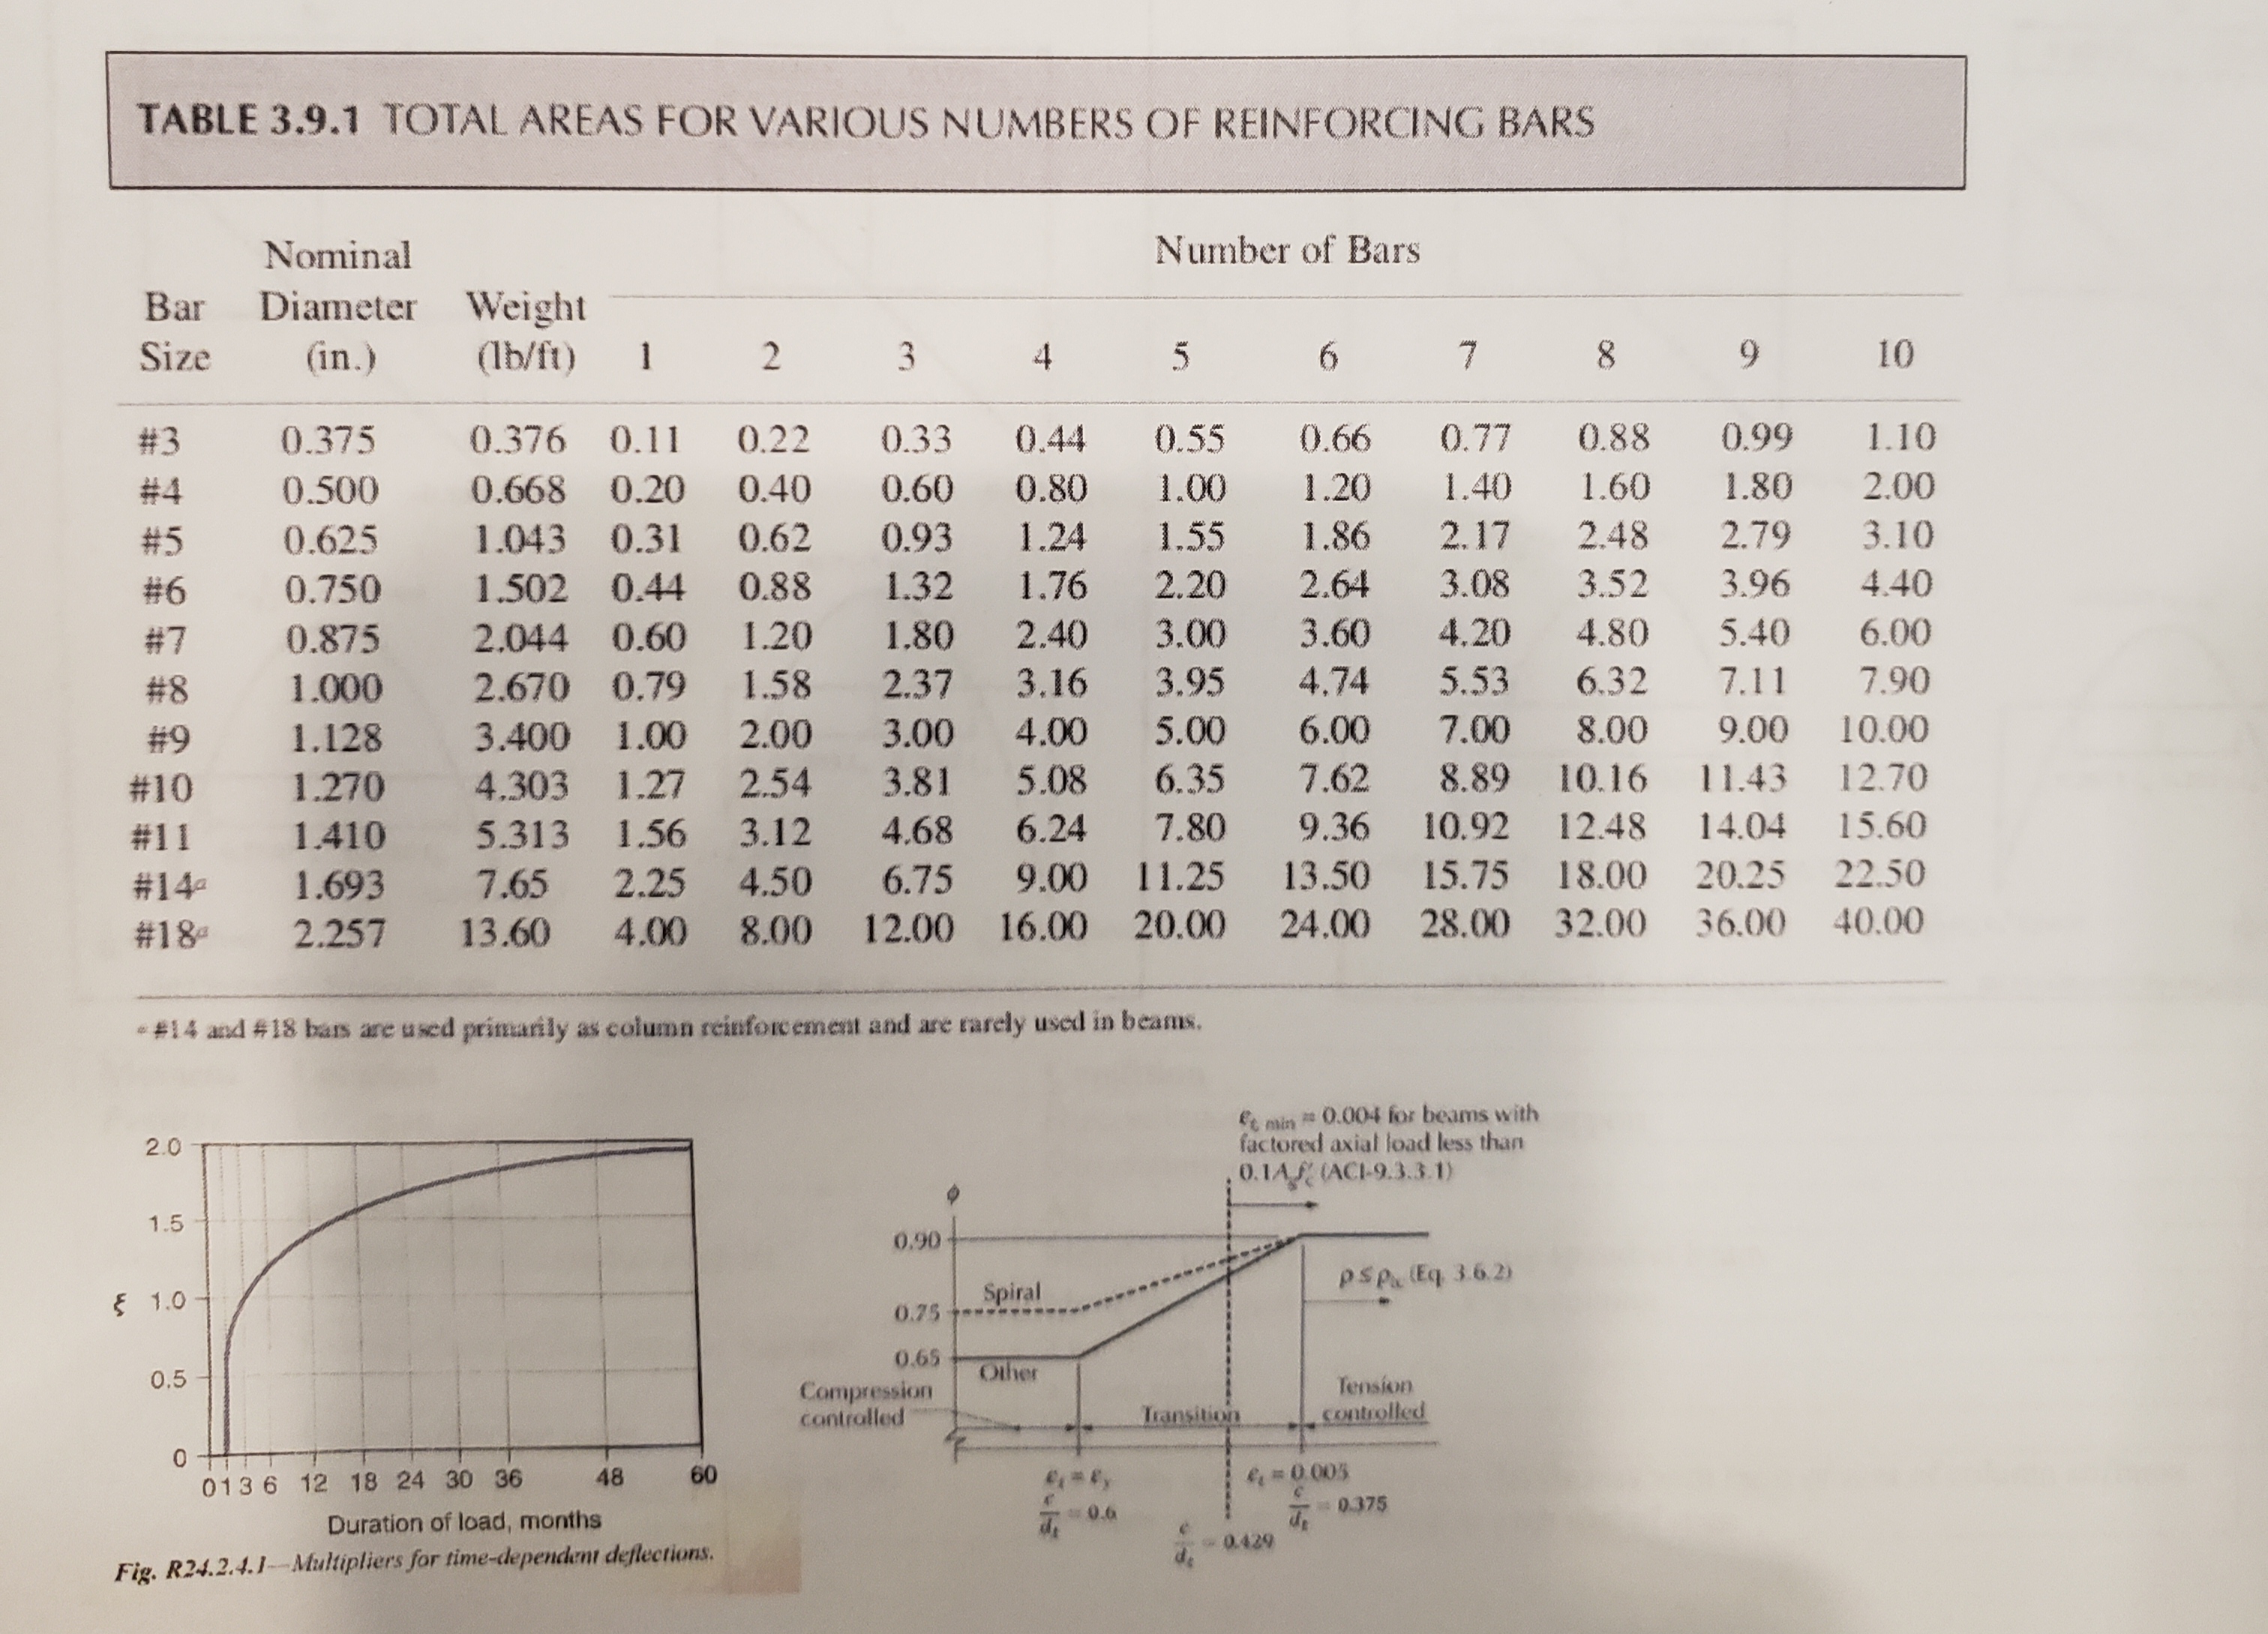 TABLE 3.9.1 TOTAL AREAS FOR VARIOUS NUMBERS OF REINFORCING BARS
Number of Bars
Nominal
Diameter Weight
Bar
8.
9.
10
(in.)
(lb/ft)
7.
Size
4
0.77
0.88
0.99
1.10
0.33 0.44 0.55
0.66
0.376 0.11
0.22
0.375
#3
2.00
1.60
1.80
1.20 1.40
0.668 0.20
0.60 0.80 1.00
0.40
0.500
3.10
1.86 2.17
2.48
2.79
0.62
0.93 1.24 1.55
# 5
1.043 0.31
0.625
2.64
3.08 3.52
3.96
4.40
0.88
1.32 1.76 2.20
1.502 0.44
0.750
4.80
5.40
3.00
3.60
4.20
6.00
1.80 2.40
1.20
2.044 0.60
#7
0.875
7.90
5.53 6.32
4.74
7.11
1.58 2.37 3.16 3.95
2.670 0.79
1.000
# 8
6.00 7.00 8.00
10.00
9.00
3.00 4.00 5.00
3.400 1.00 2.00
1.128
#9
7.62 8.89 10.16 11.43
12.70
3.81 5.08 6.35
4.303 1.27 2.54
1.270
#10
9.36 10.92 12.48 14.04
15.60
4.68 6.24 7.80
5.313 1.56 3.12
1.410
#11
6.75 9.00 11.25 13.50 15.75 18.00 20.25
24.00 28.00 32.00 36.00
22.50
7.65
4.50
2.25
1.693
#14
40.00
8.00 12.00 16.00 20.00
4.00
2.257
13.60
#18
#14 and #18 bars are used primarily as column reinforc ement and are rarely used in beams.
e min # 0.004 for beams with
factored axial load less than
2.0
0.1A (ACI-9.3.3.1)
1.5
0.90
psp (Eq 3.6.2)
Spiral
{ 1.0
0.75
0.65
Other
0.5
Tension
controlled
Compression
contralled
Iransition
48
60
=0.005
013 6 12 18 24 30 36
0.375
0.6
Duration of load, months
0.429
Fig. R24.2.4.1-Multipliers for time-dependent deflections.
2.
